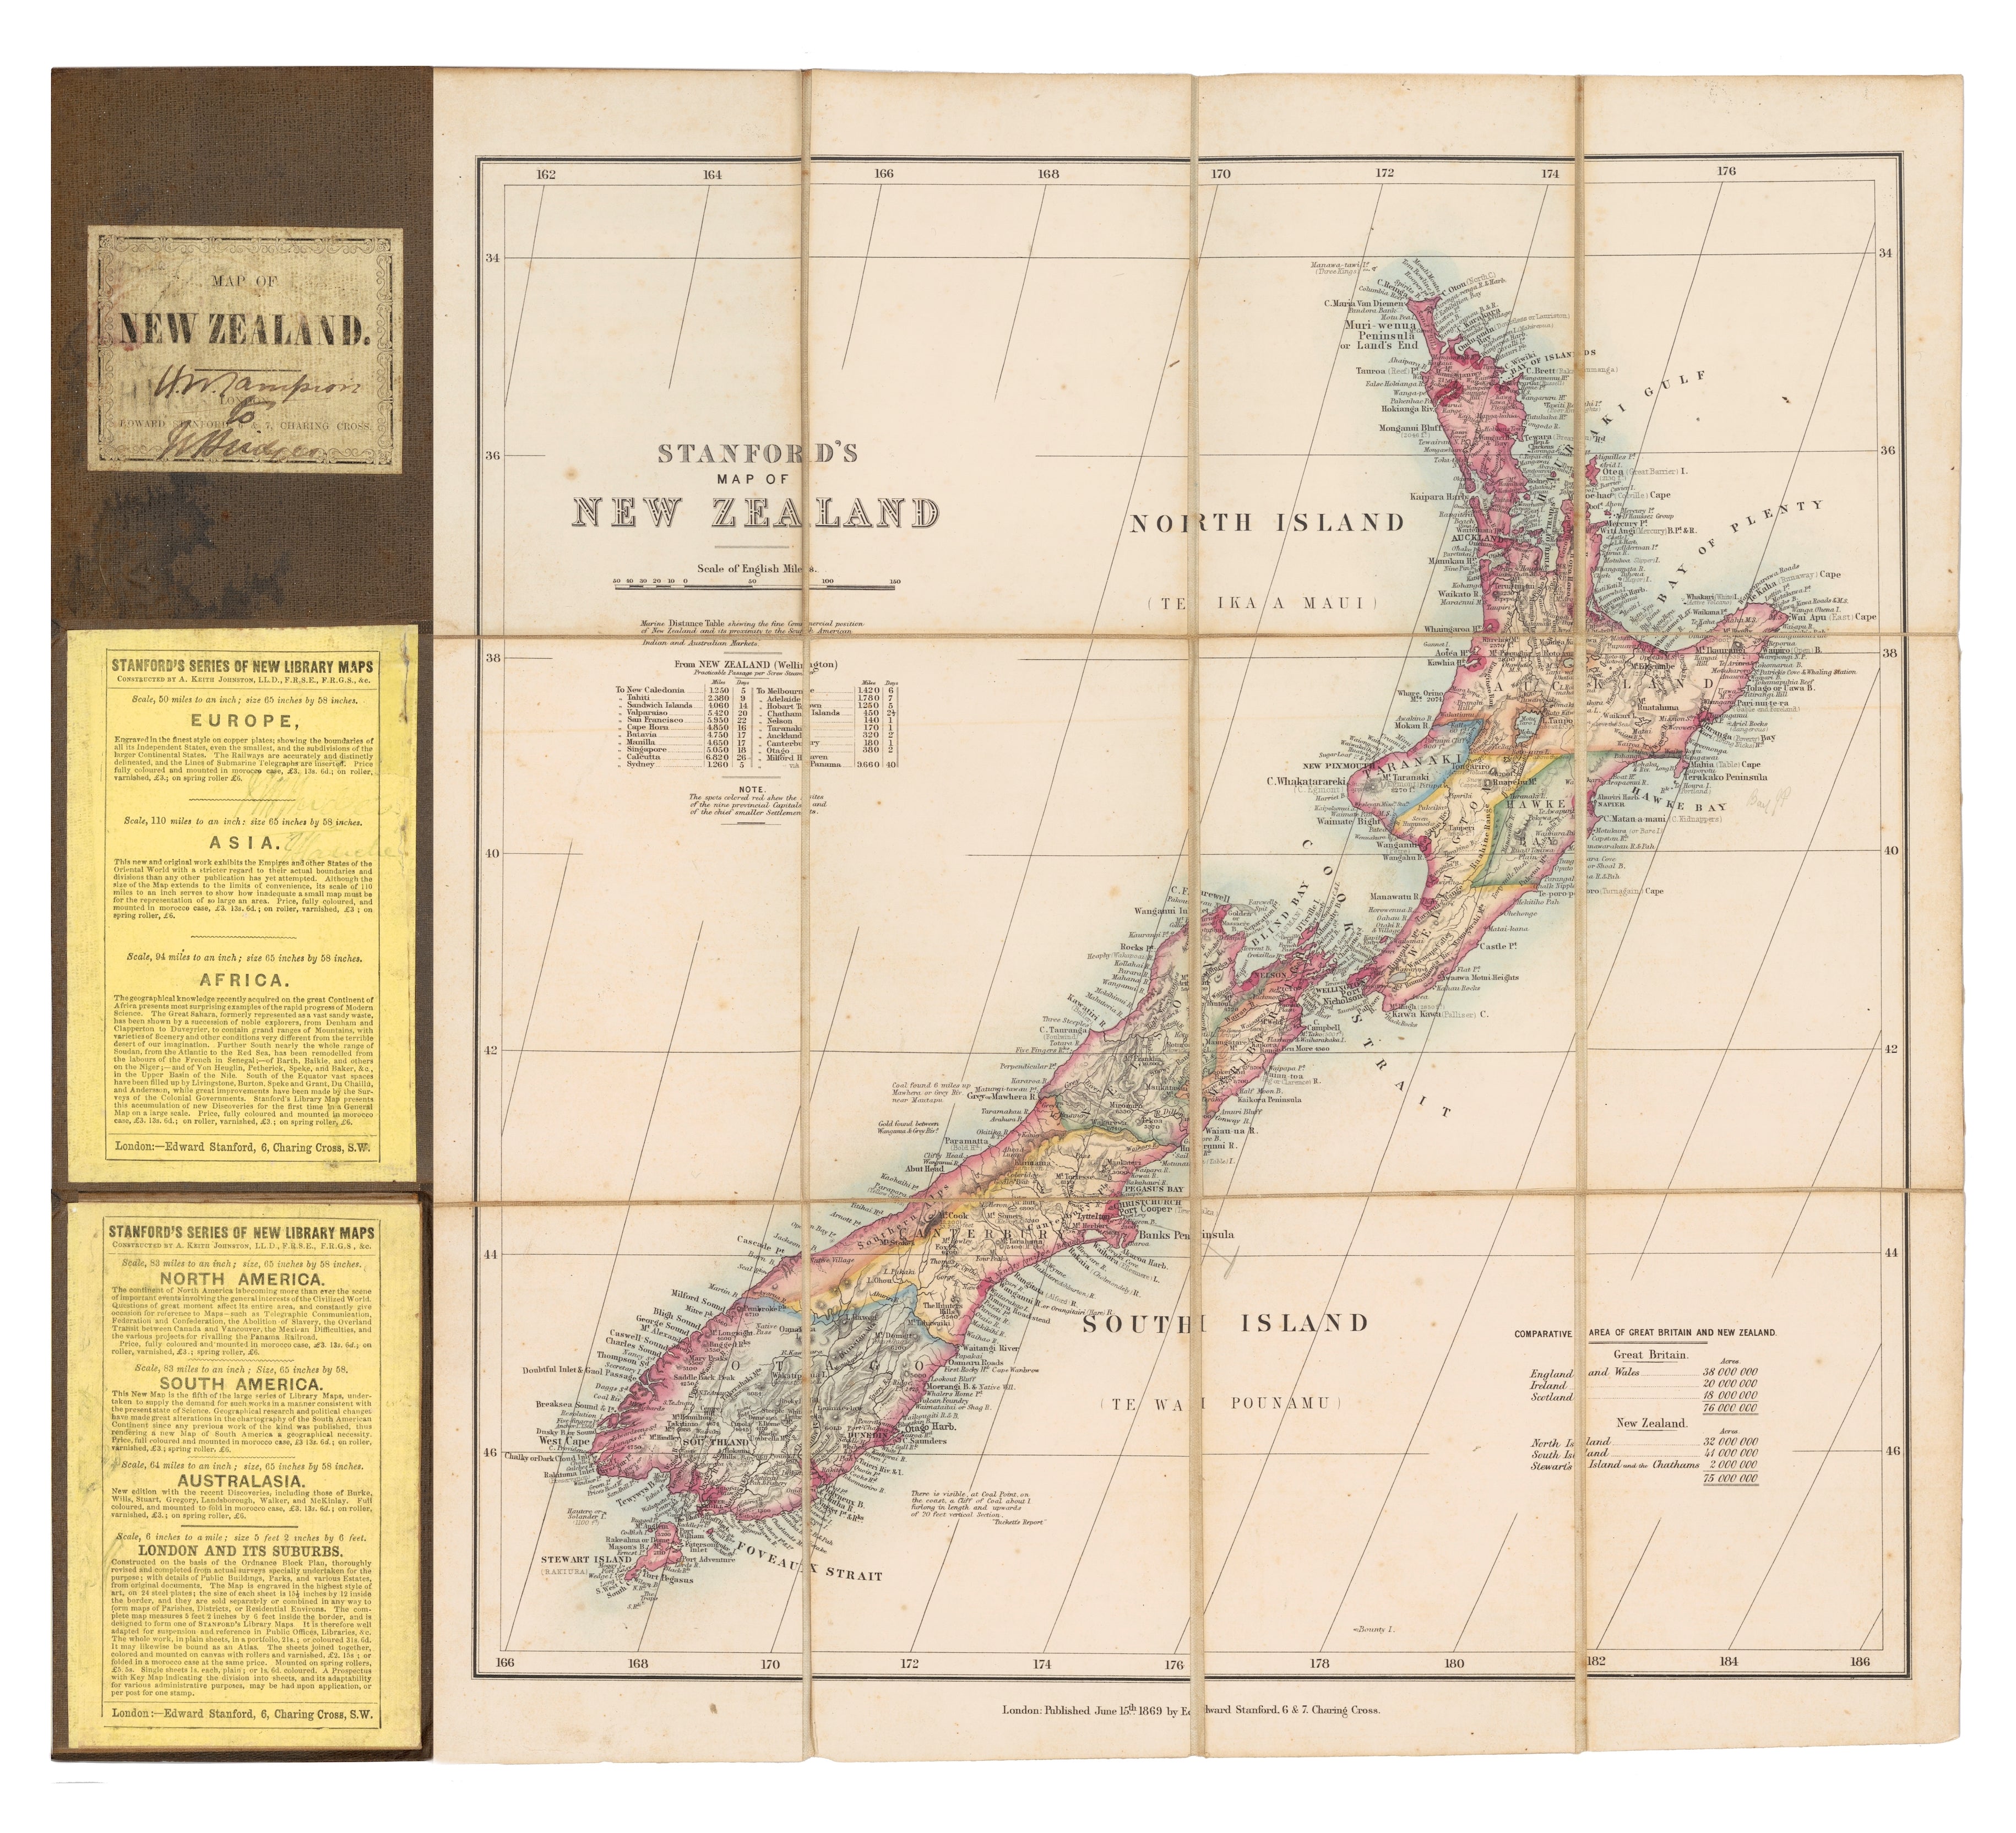 Folding map of New Zealand by Edward Stanford [Reproduction]